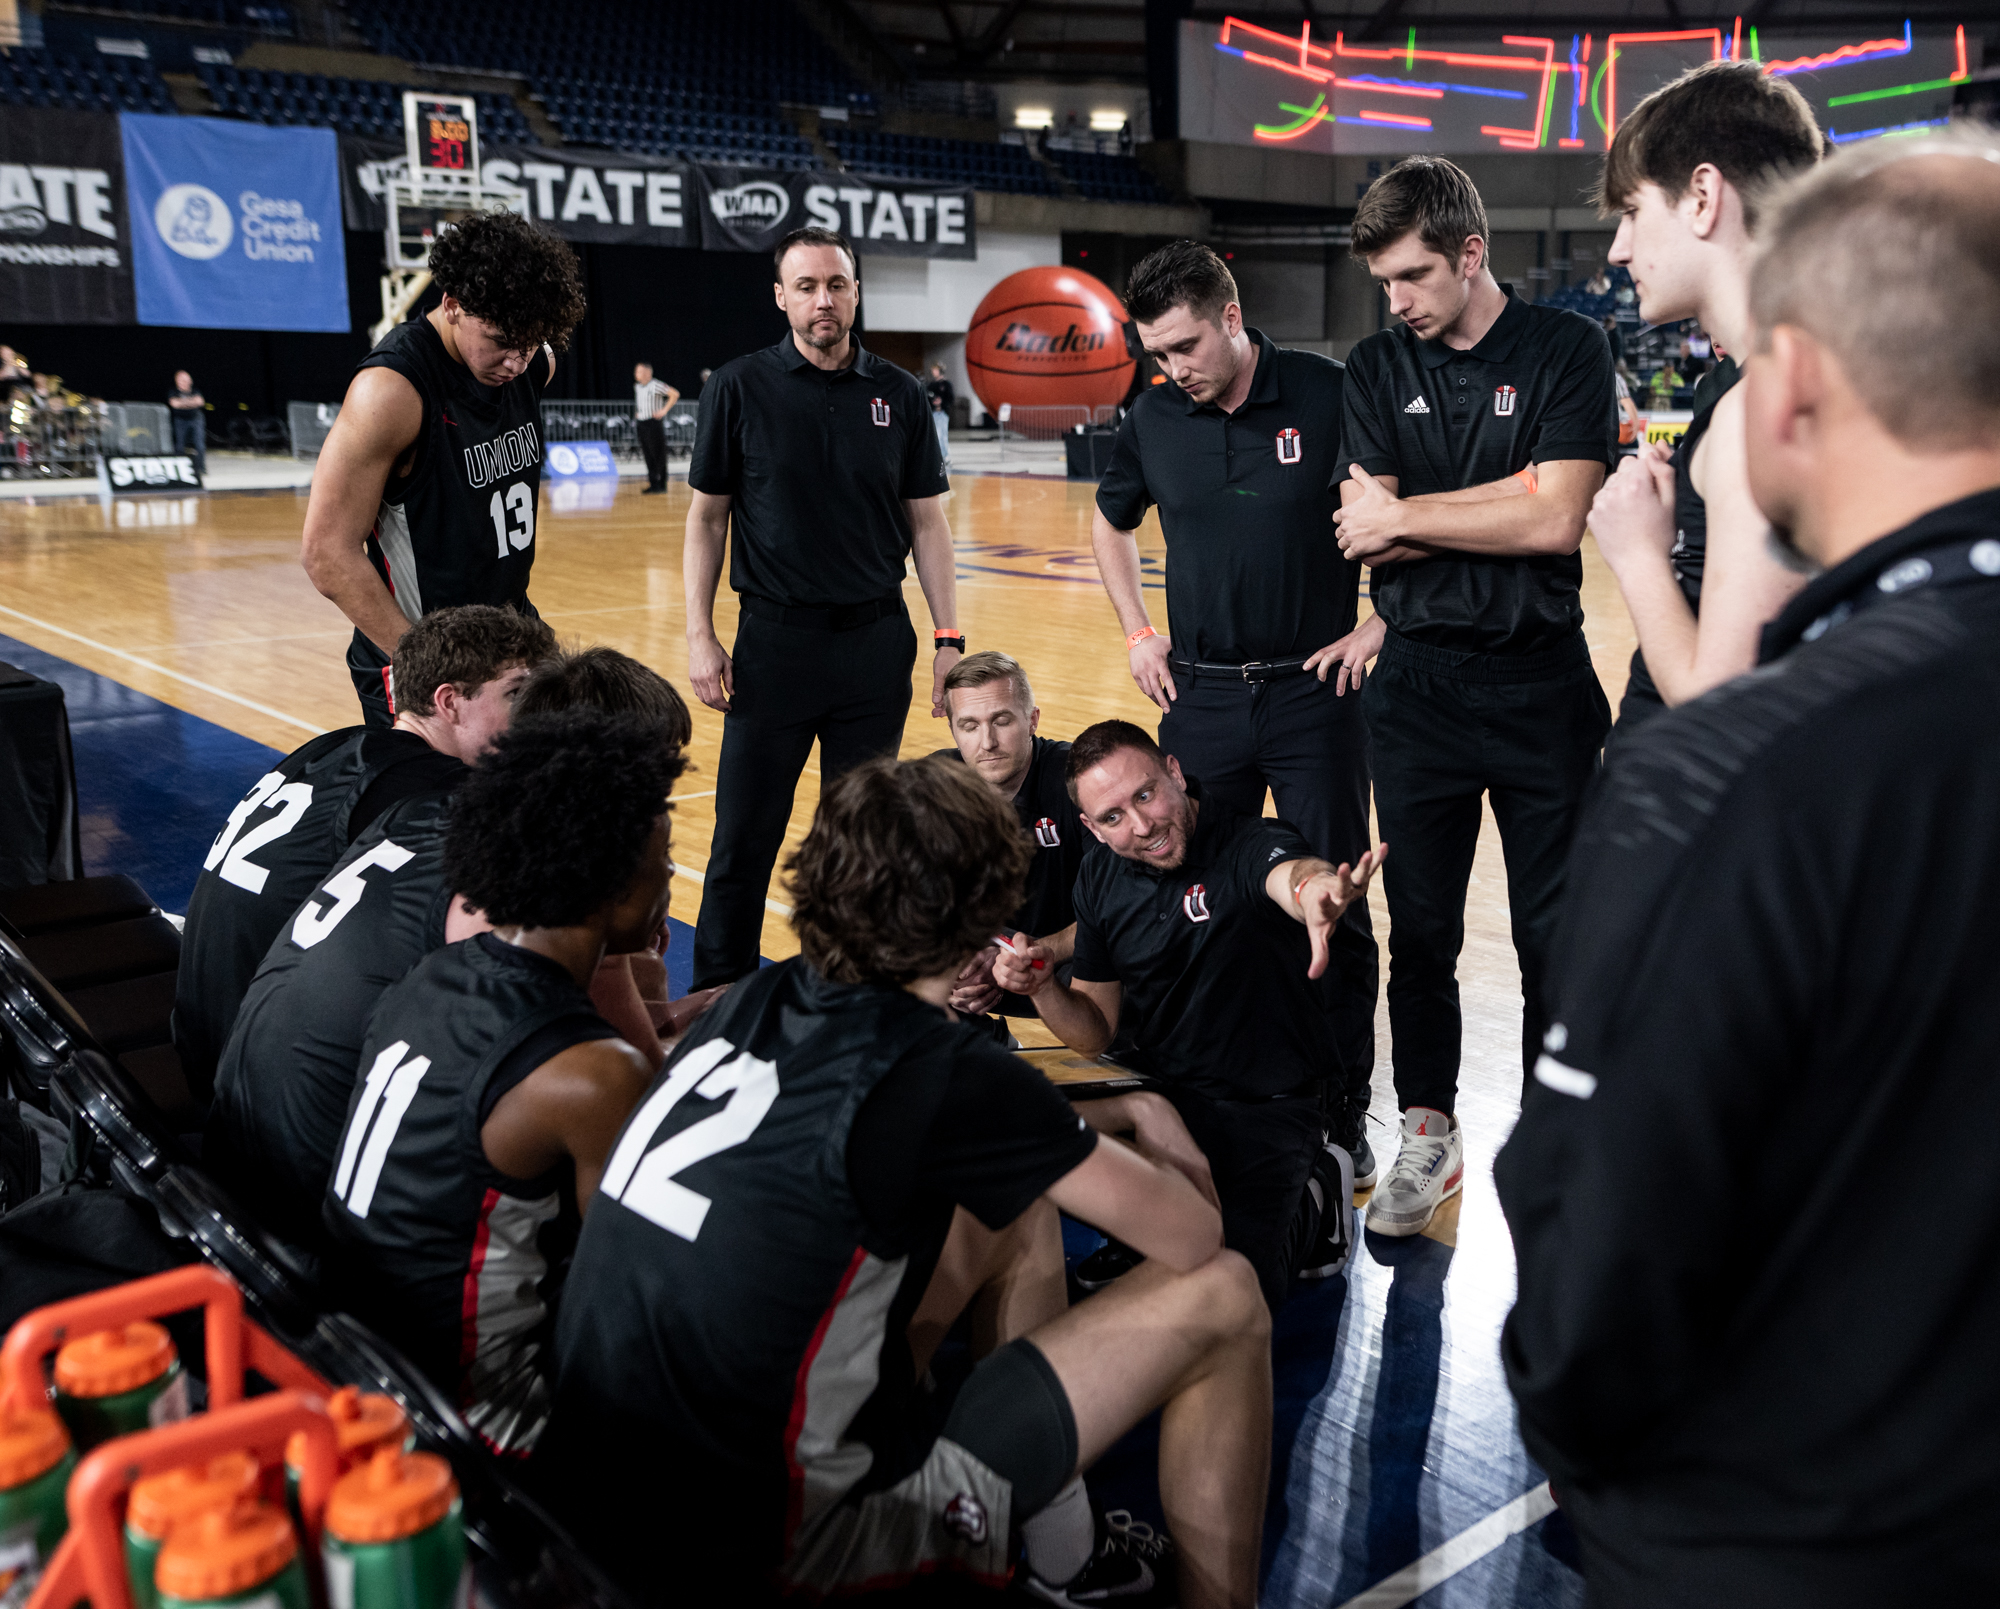 Union coach Blake Conley issues direction during a timeout during a Class 4A State boys basketball game on Wednesday, March 1, 2023, at the Tacoma Dome.